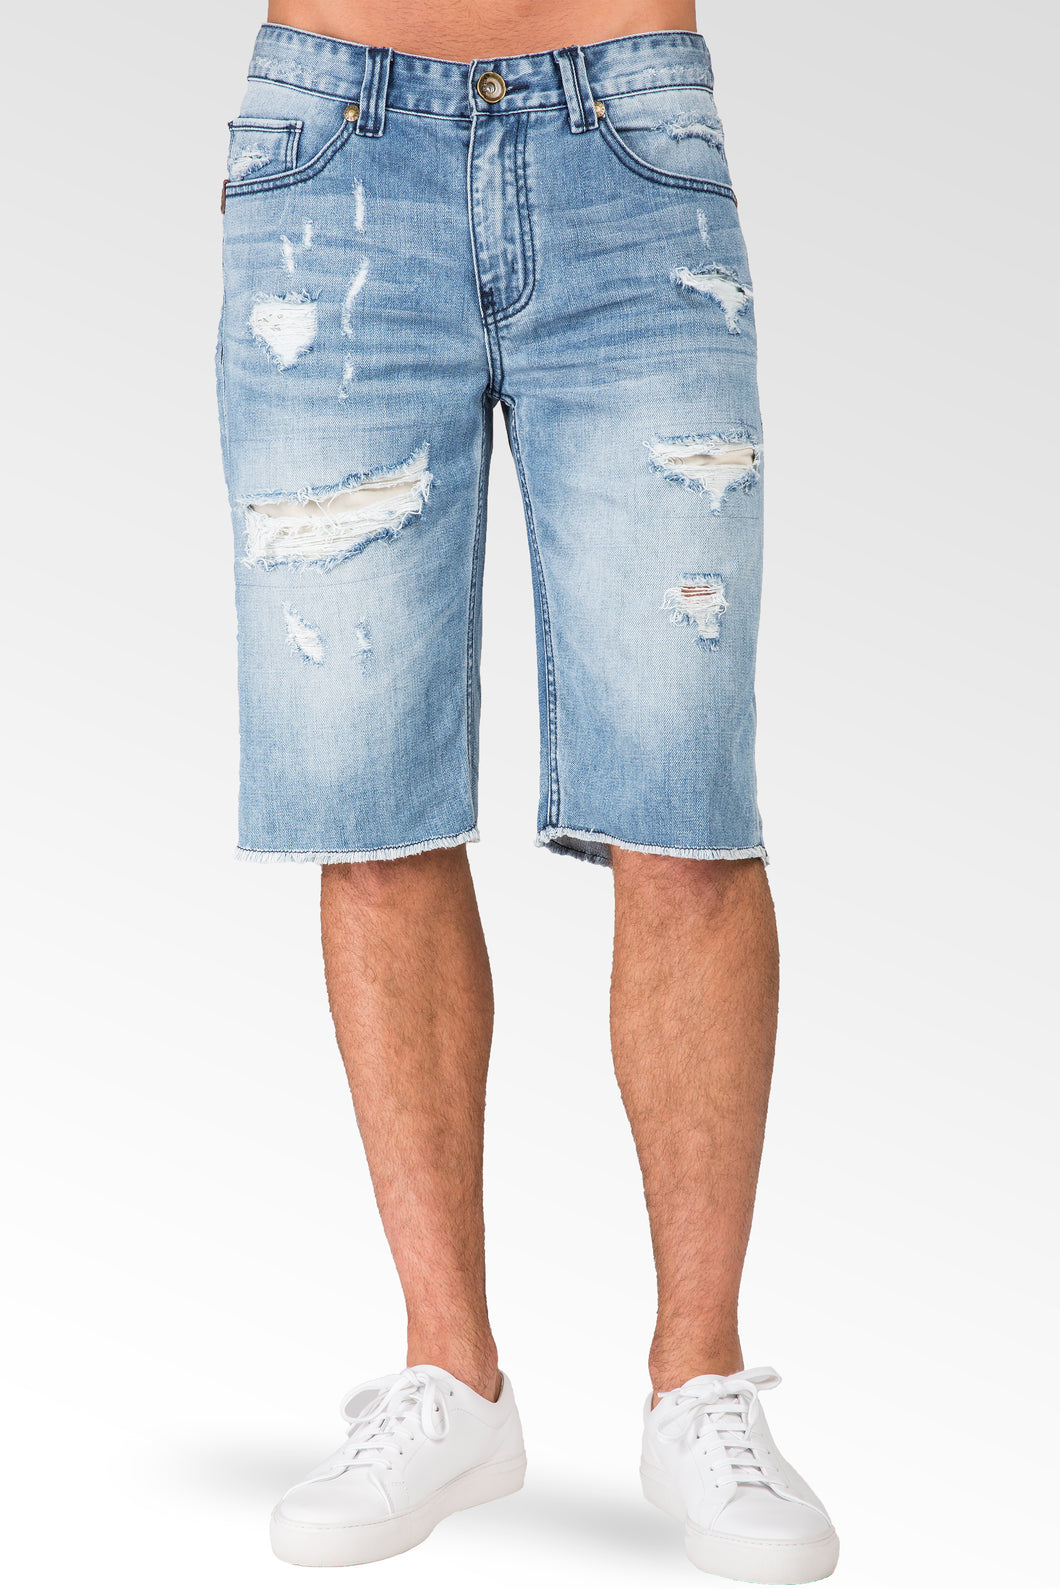 Level 7 Men's Light Blue Wash Relaxed Distressed & Frayed Shorts ...